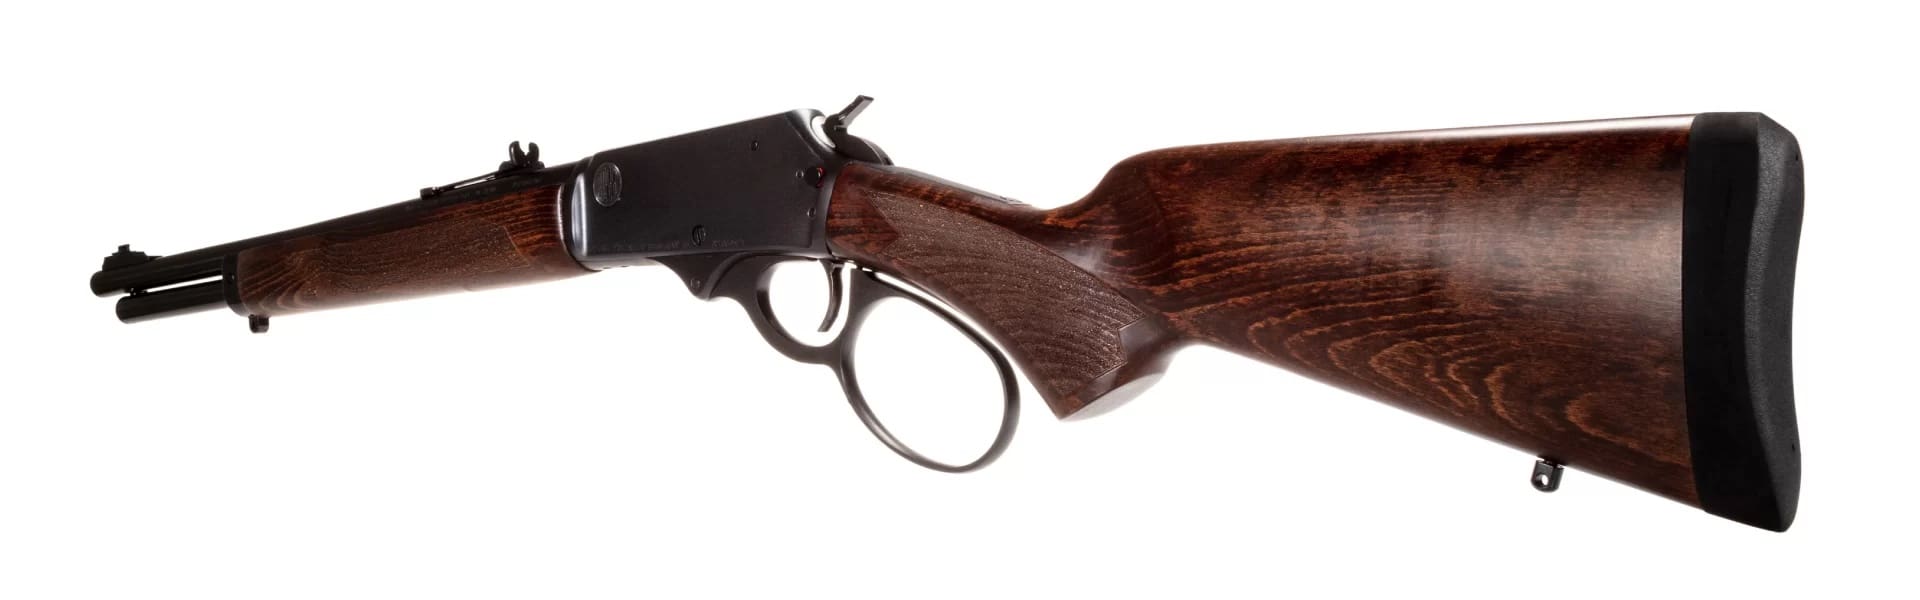 Rossi R95 lever action rifle 